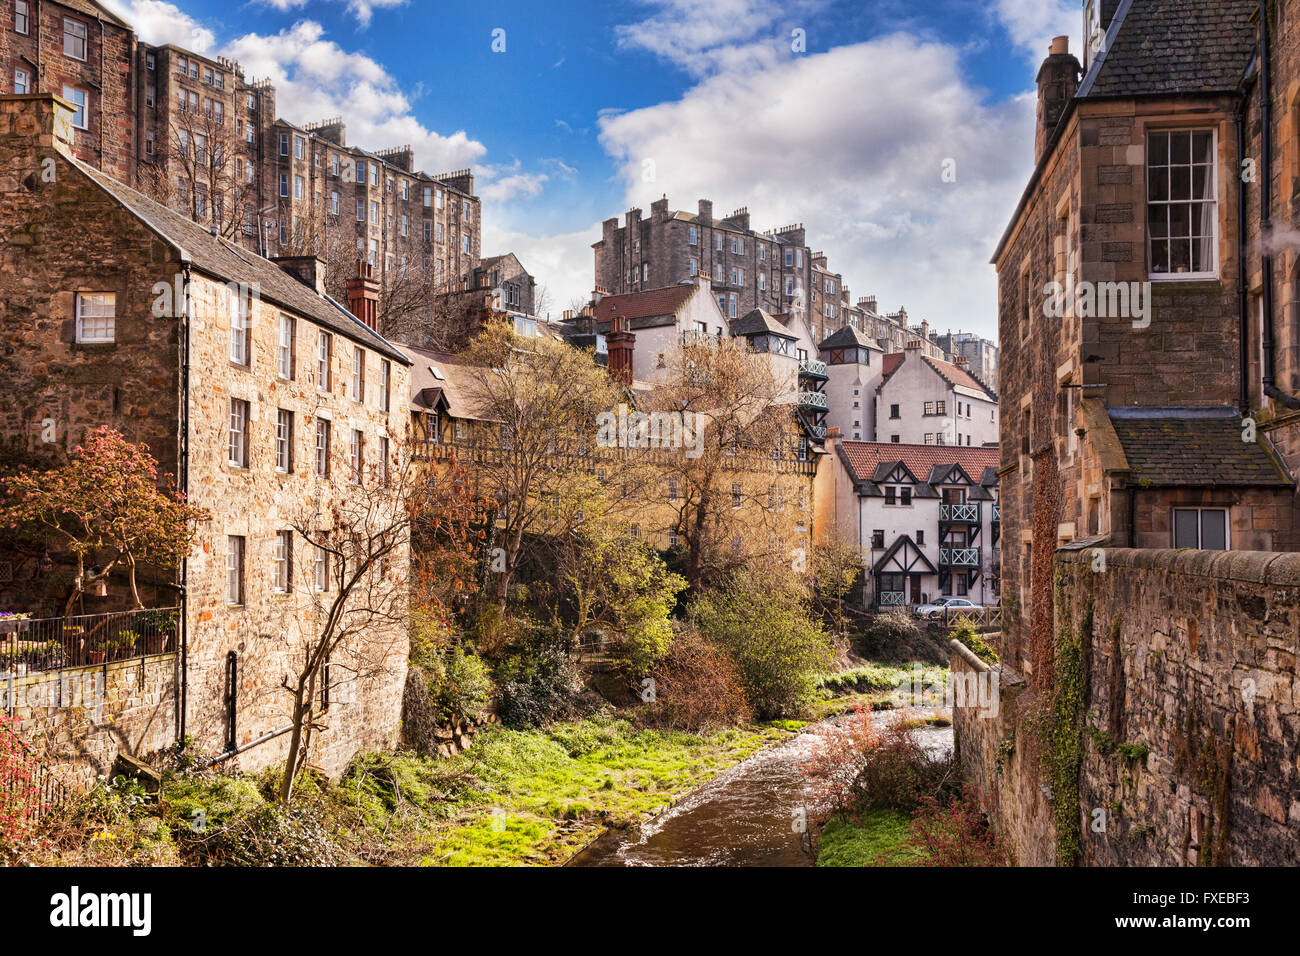 Houses and apartments overlooking the Water of Leith, Edinburgh, Scotland, UK Stock Photo